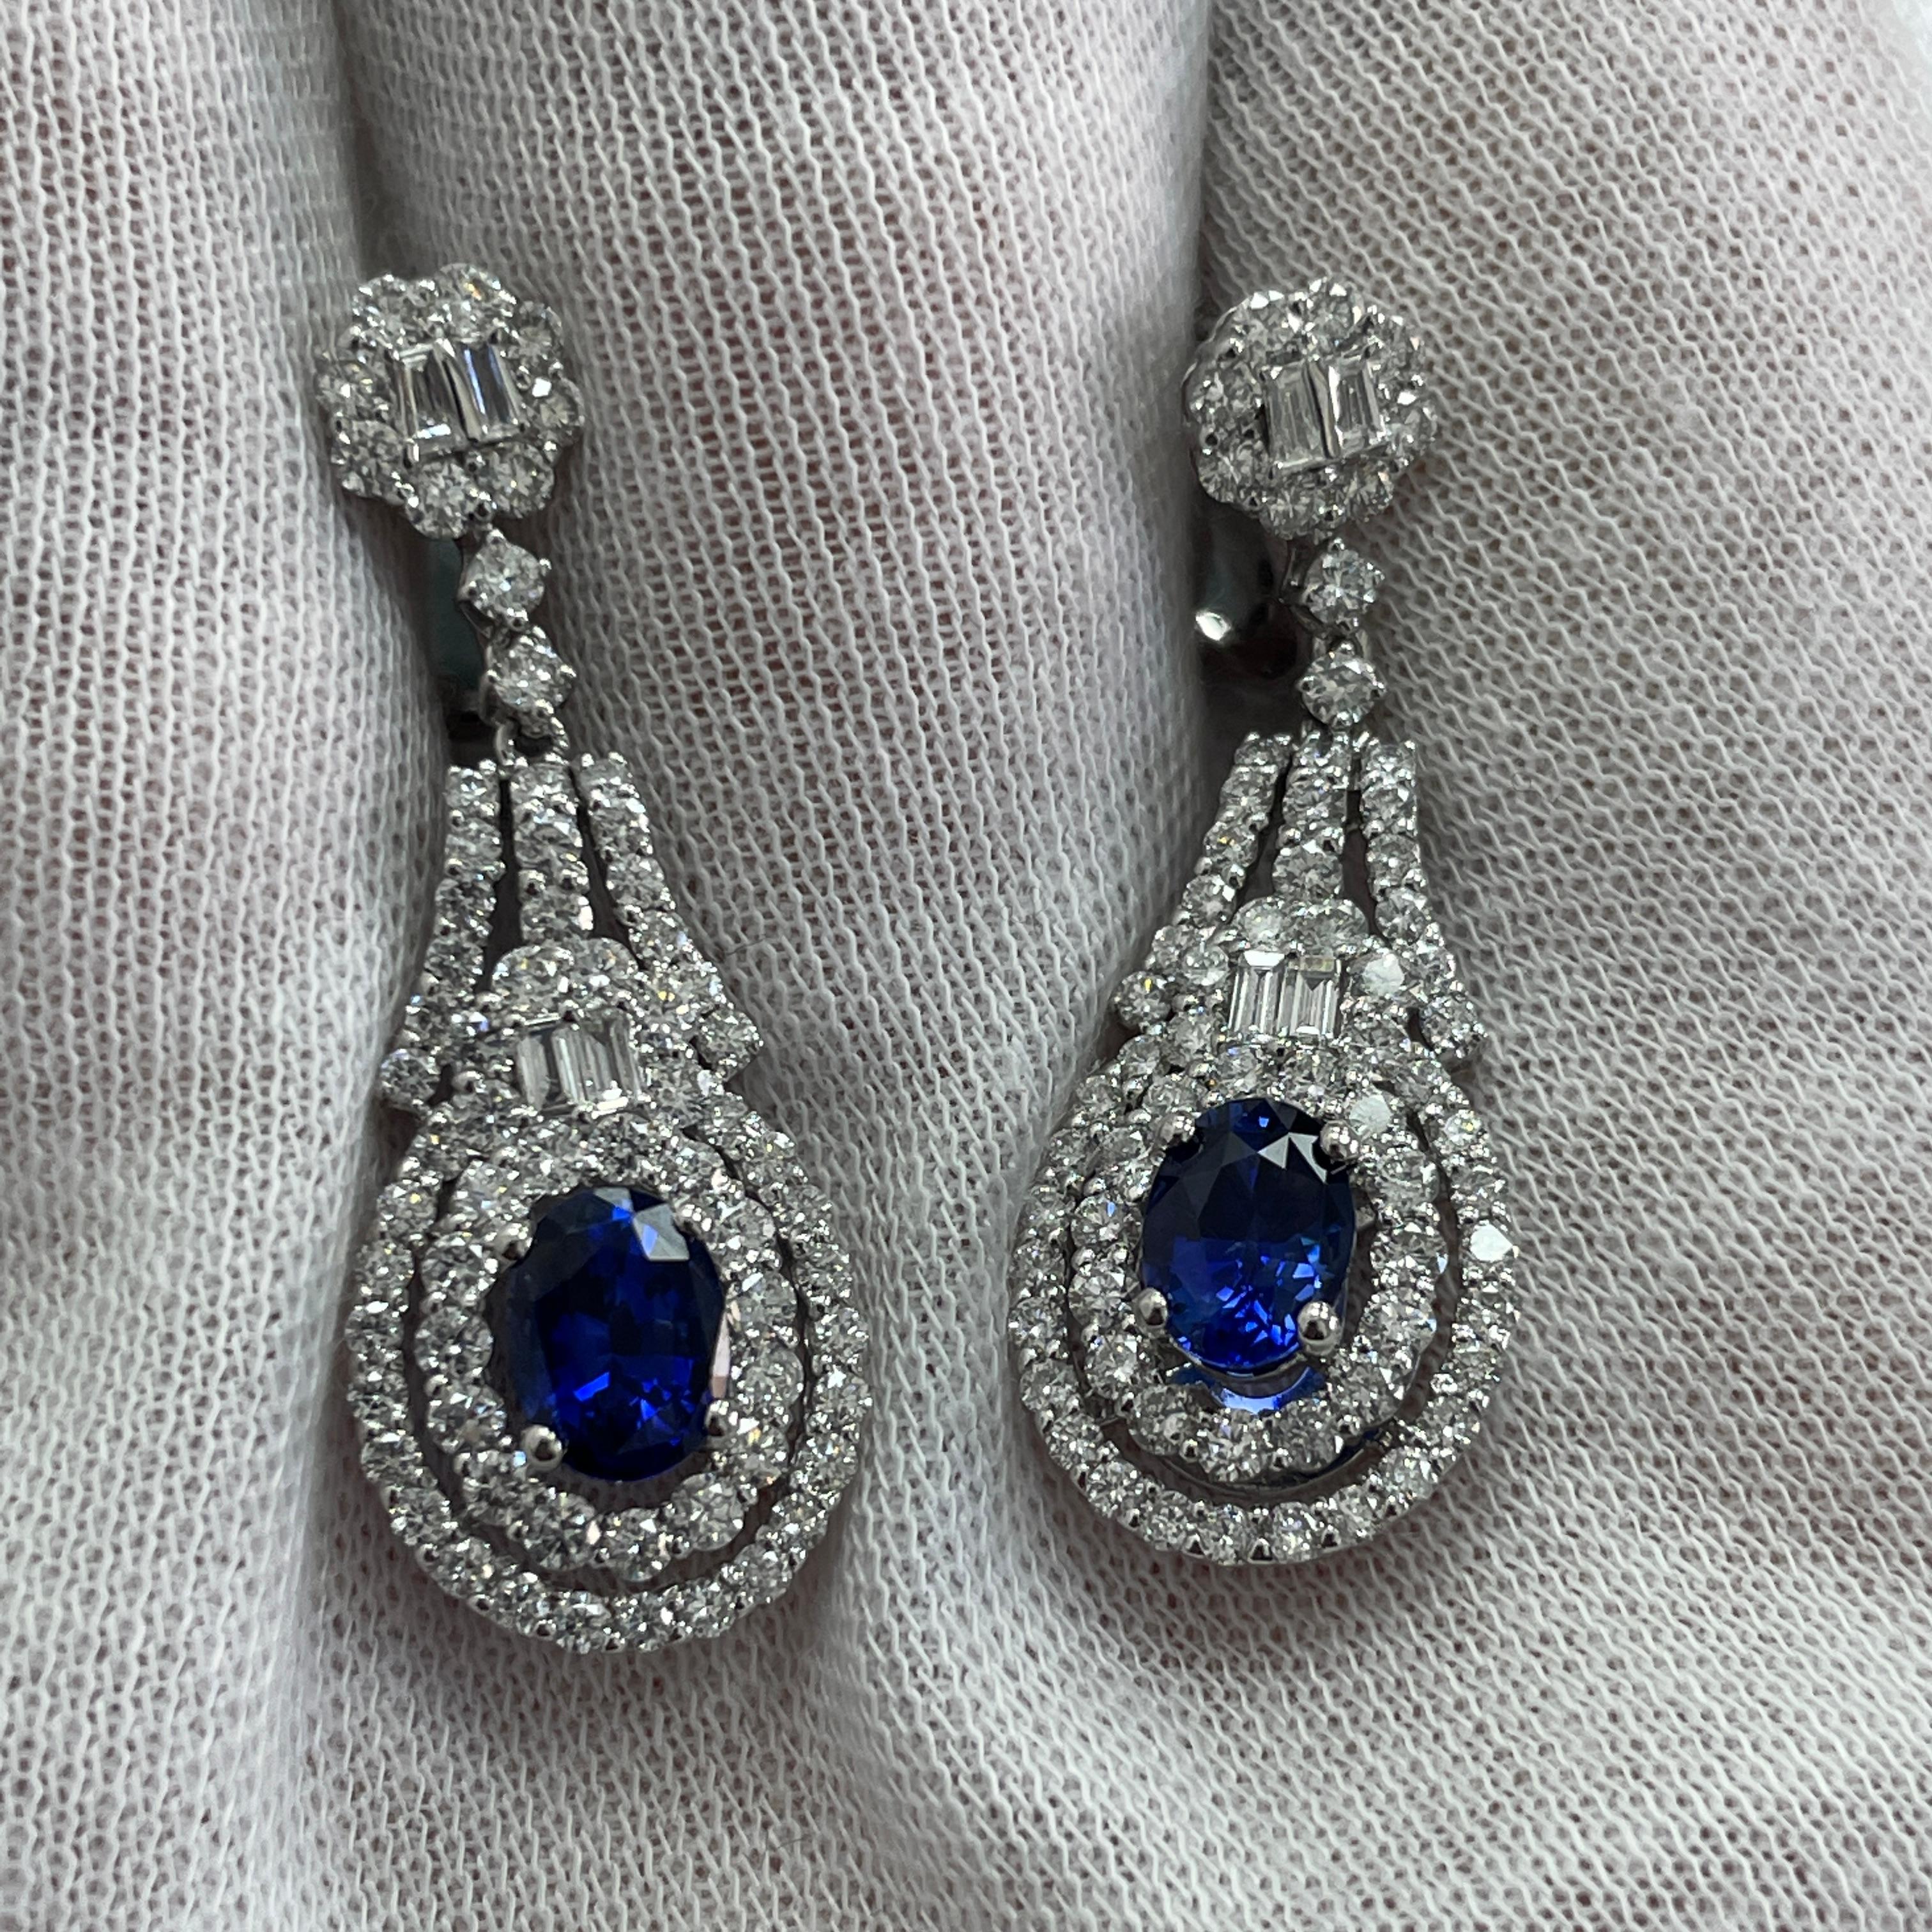 These dangling 18K white gold earrings carry 2.61Ct of brilliant white diamonds and 2.23Ct of stunning matching sapphires